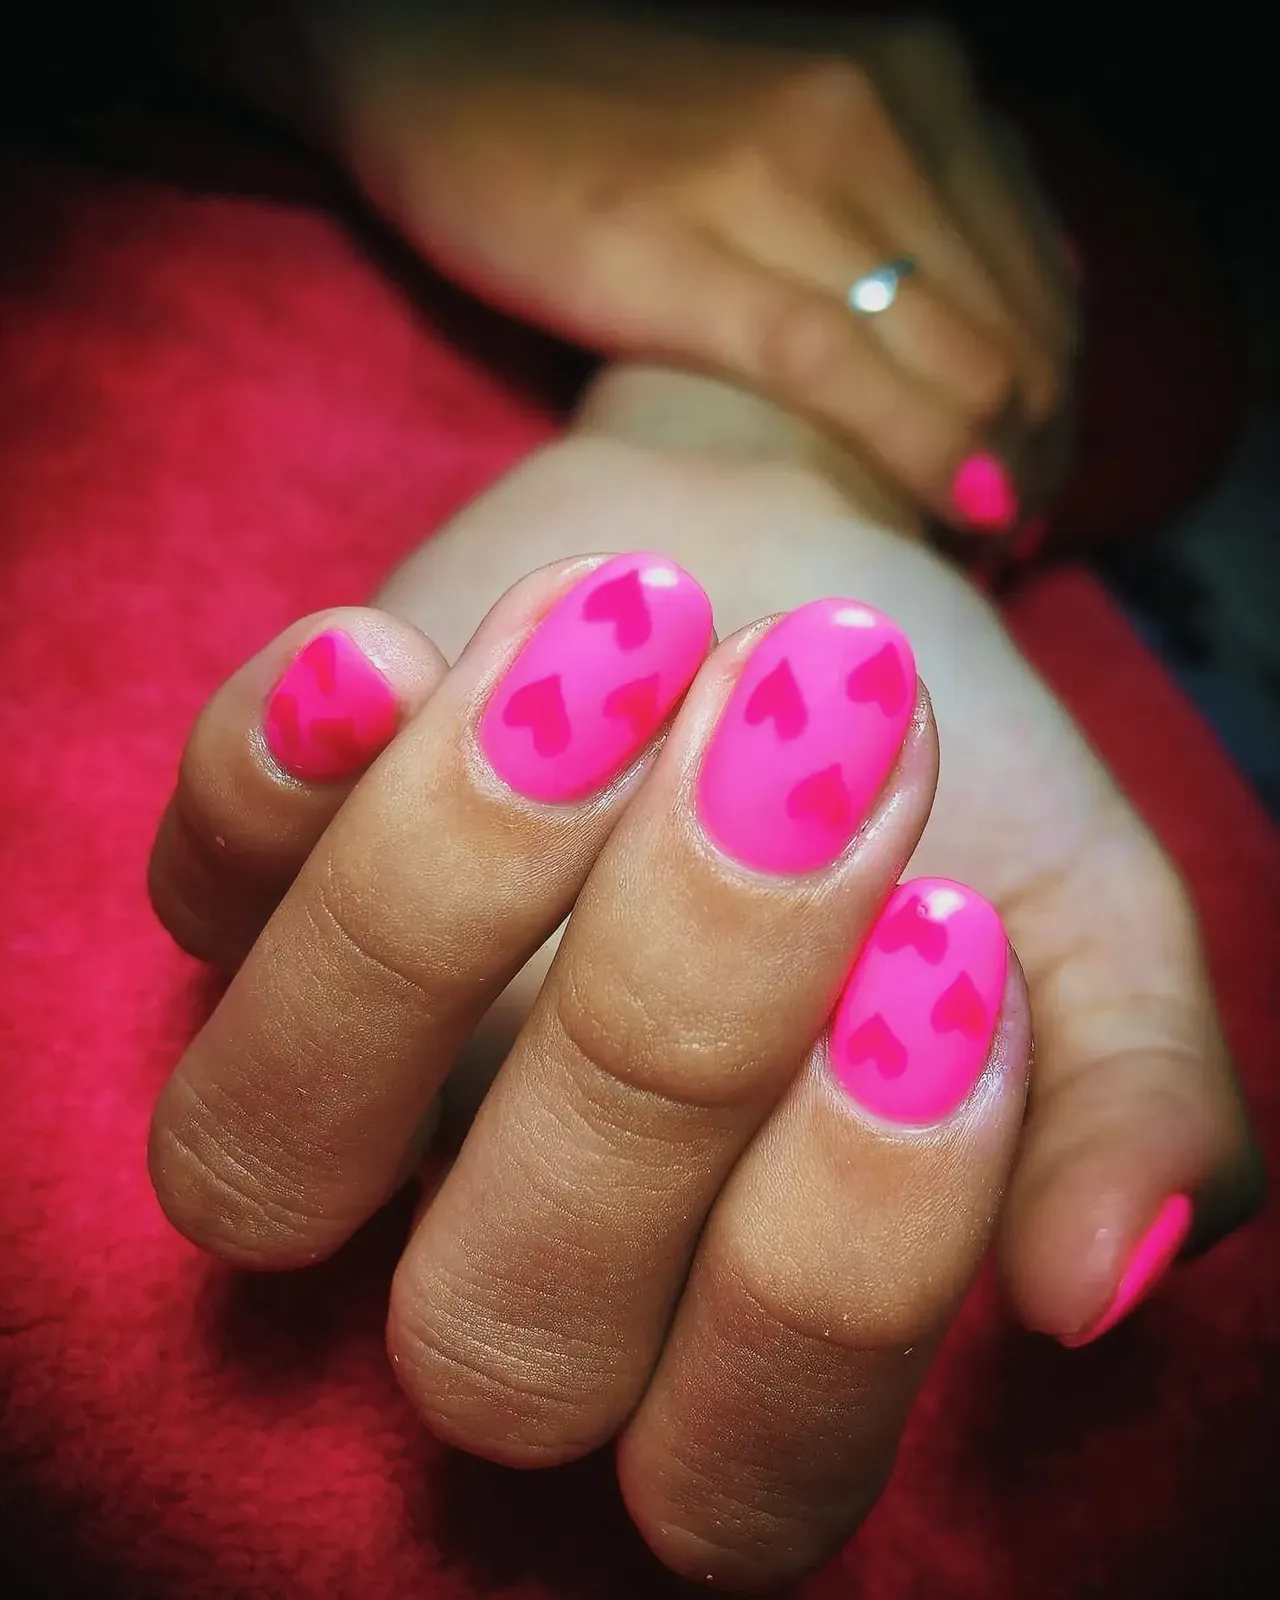 Close-up of beautifully painted pink nails with heart designs